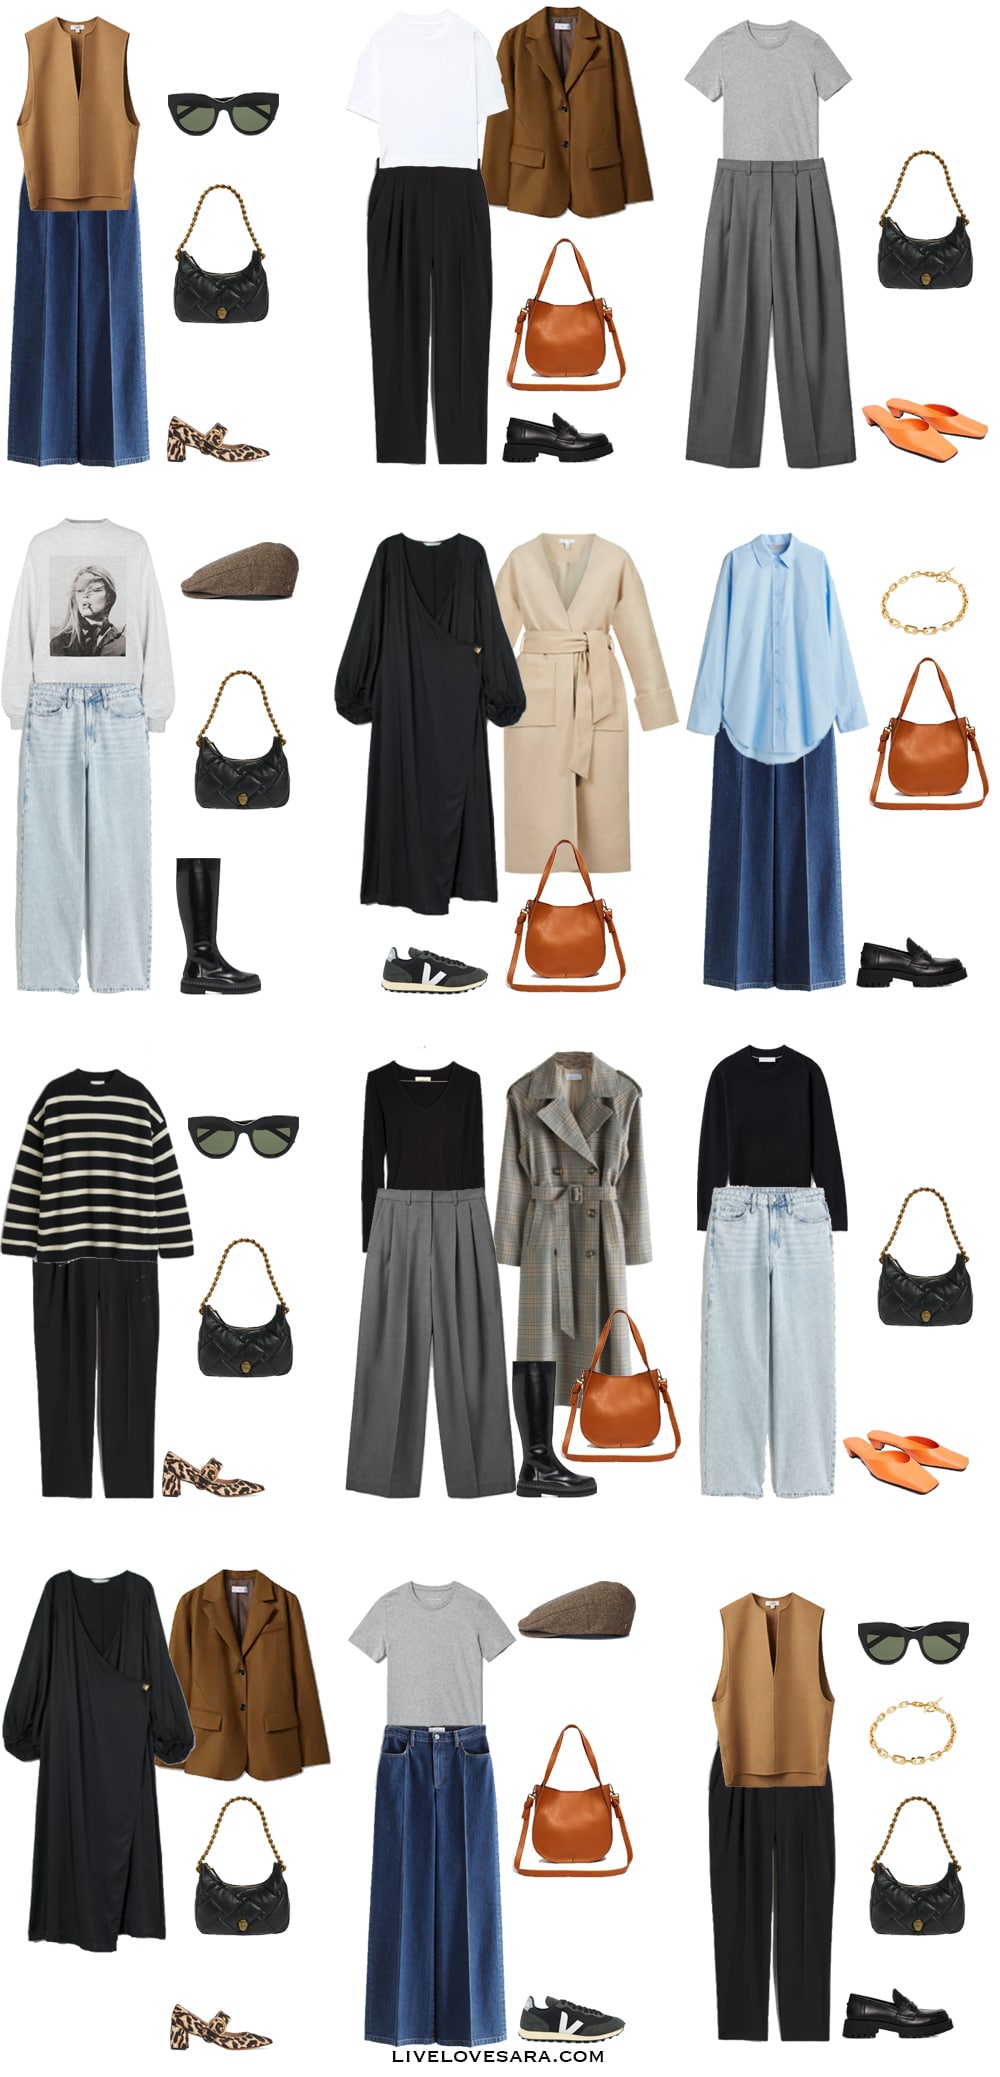 A white background with outfits 1-12 built from the spring capsule wardrobe essentials 2022.